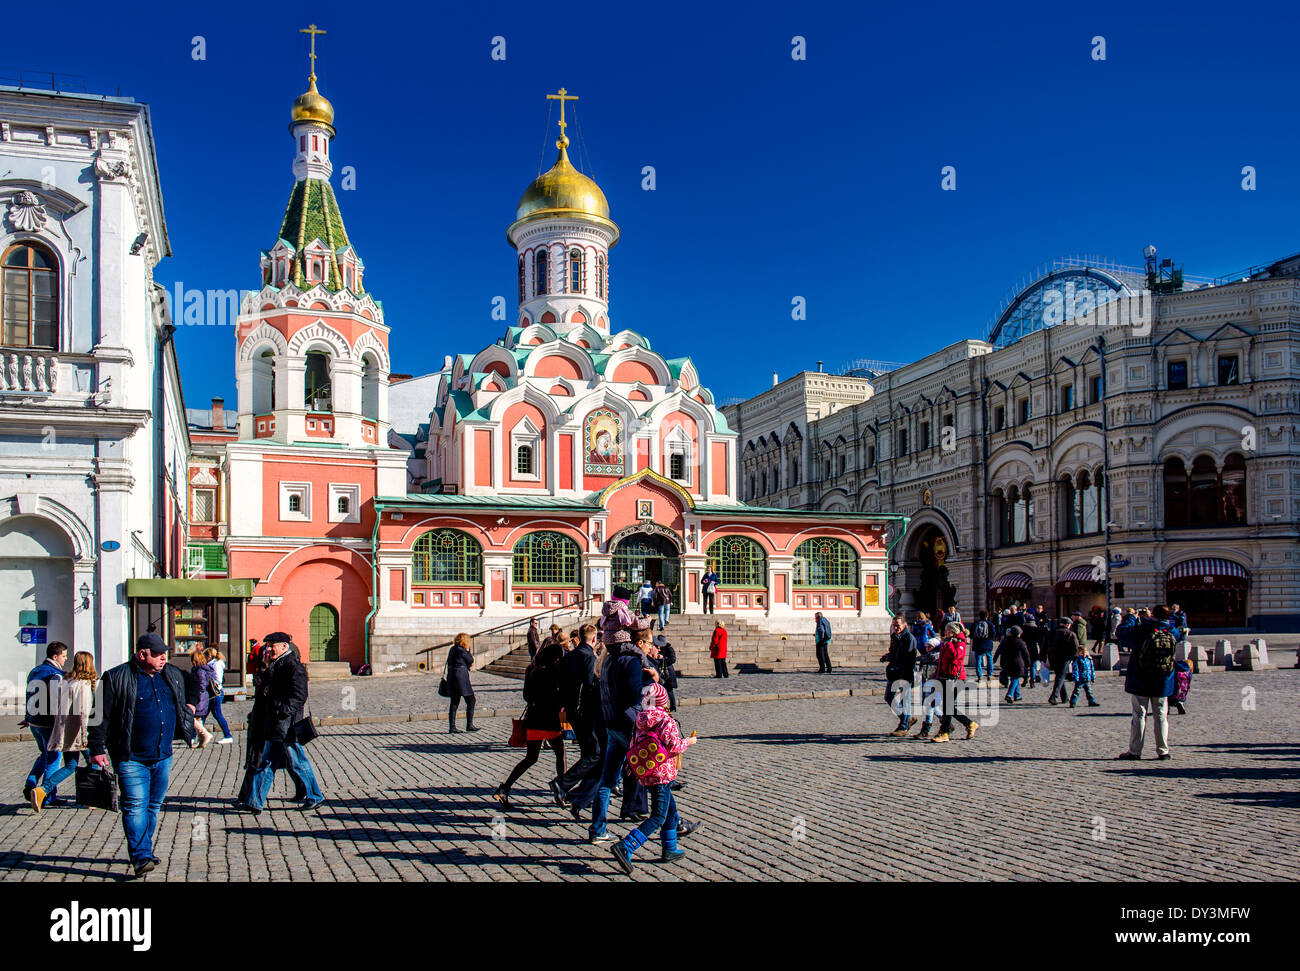 A crowd of people walking on Red Square. View of Kazan Cathedral and GUM Trading House Stock Photo